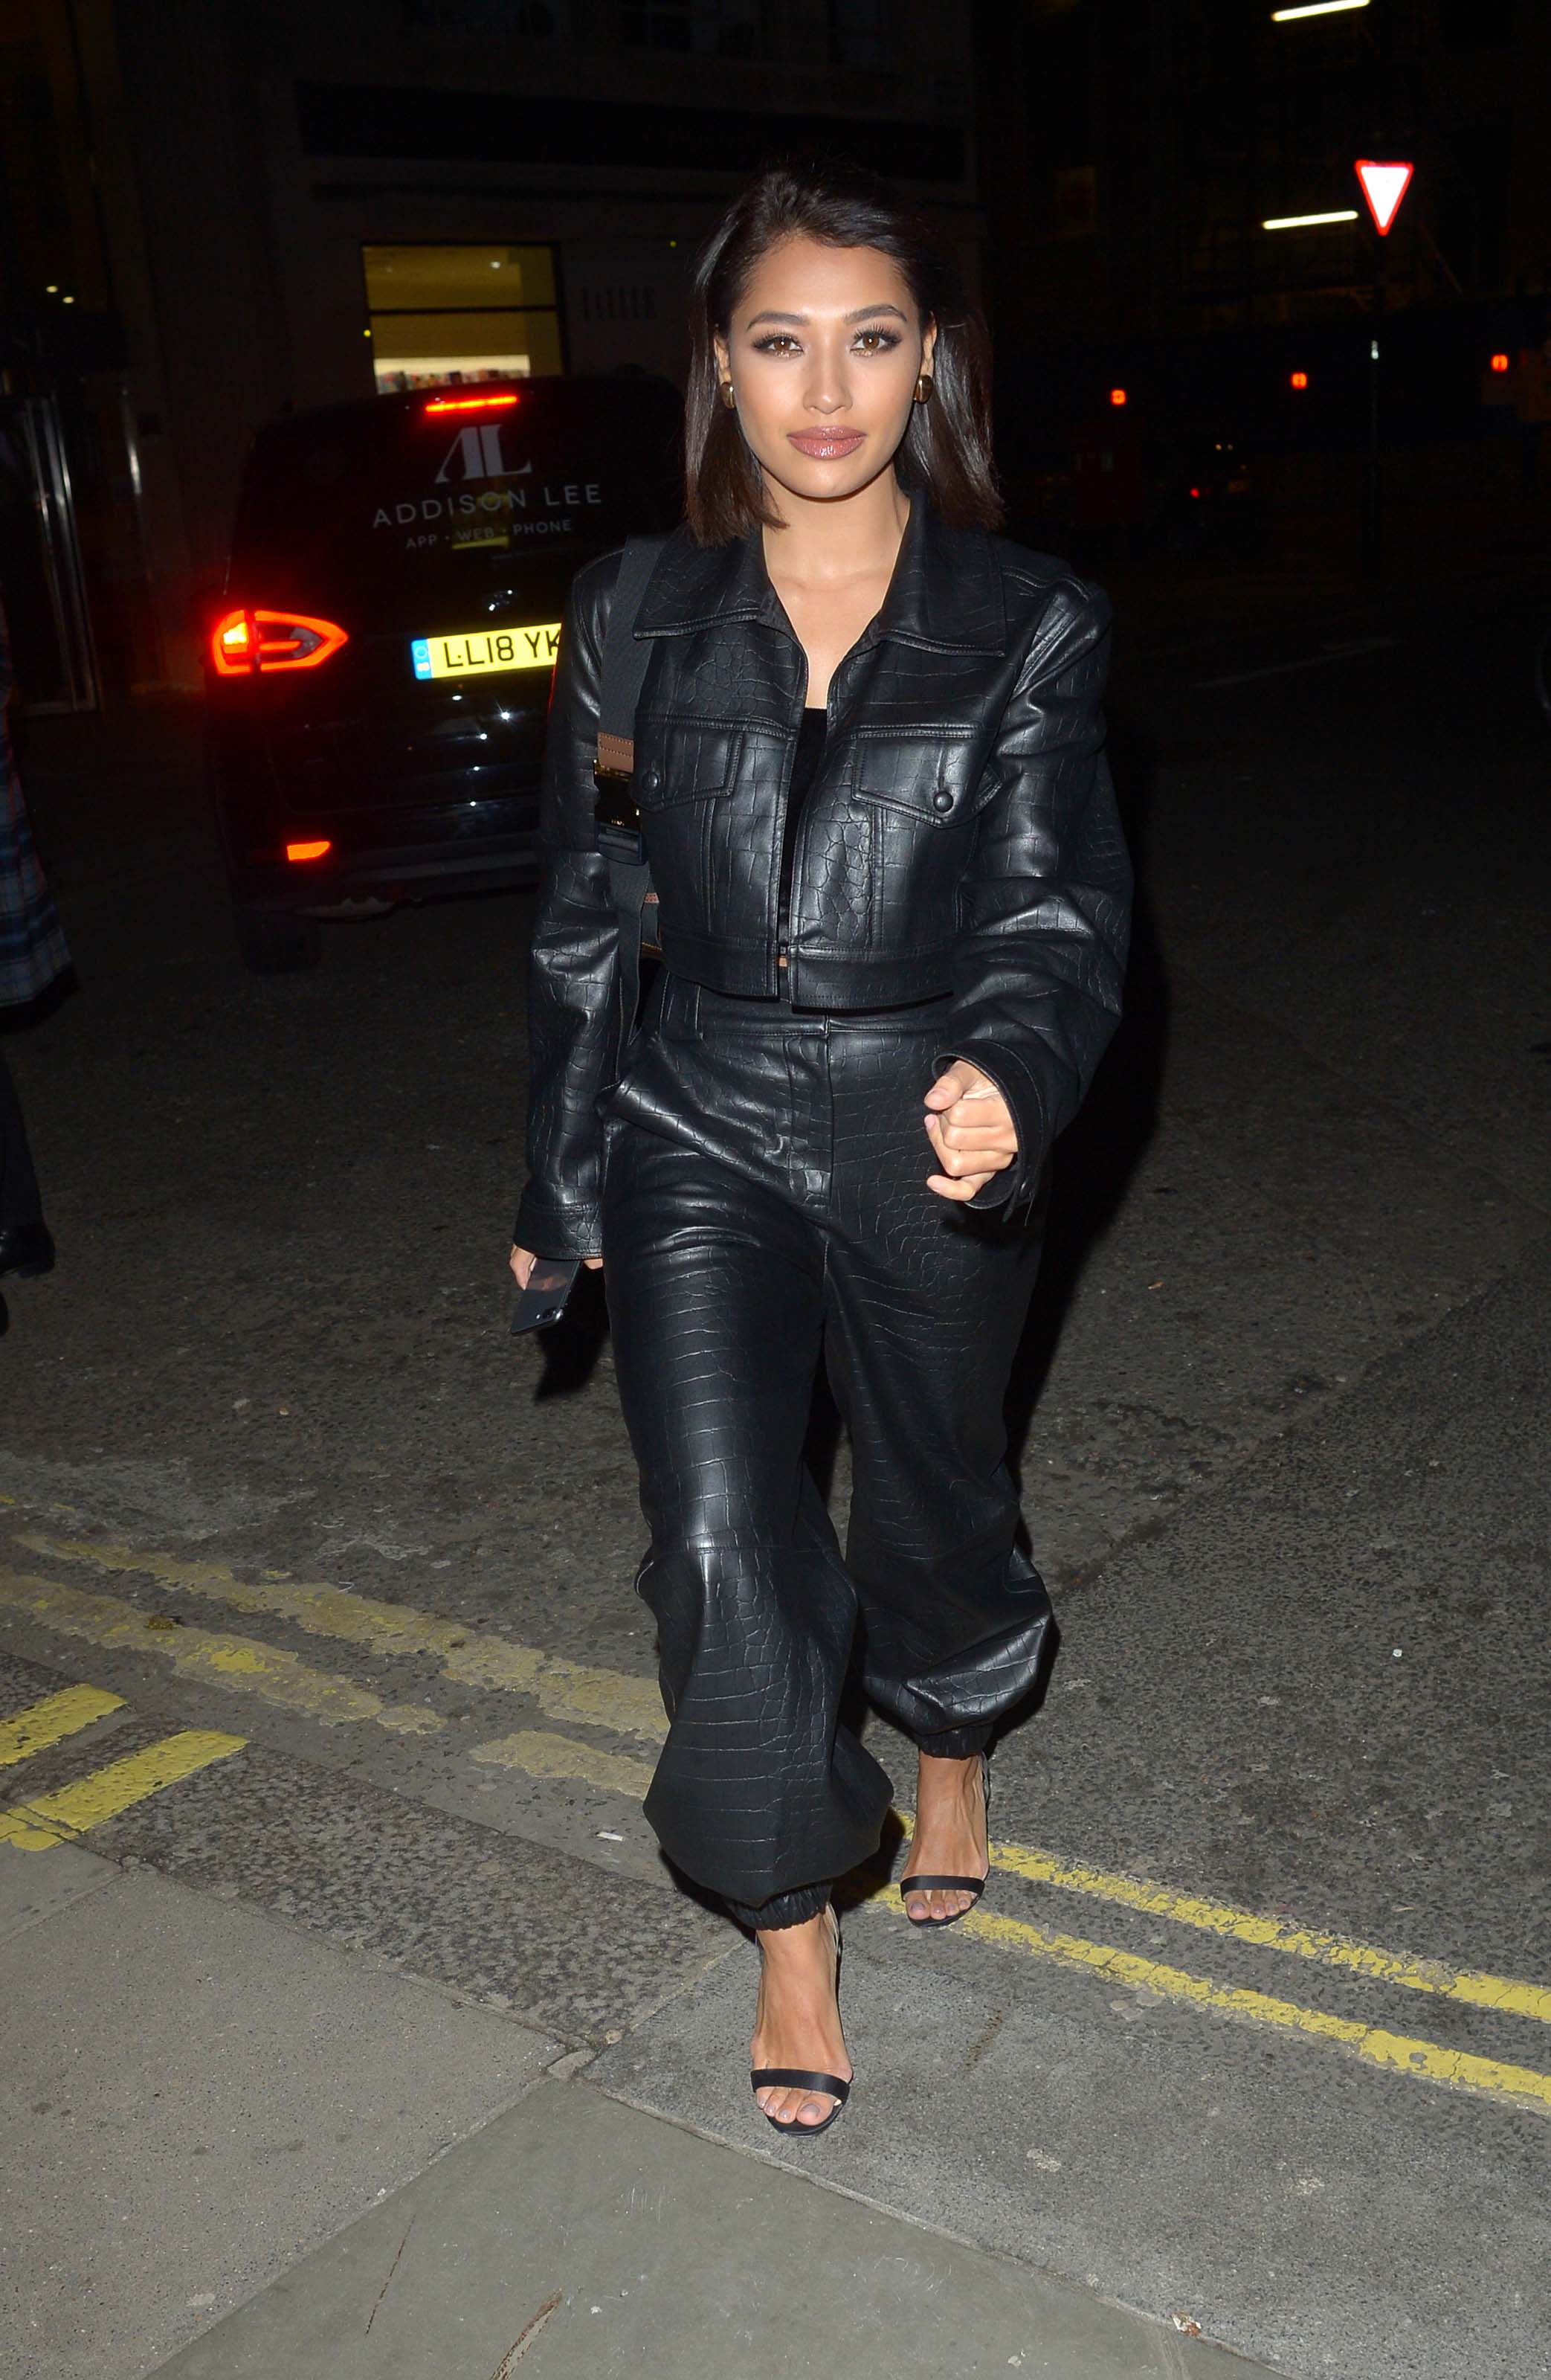 Vanessa White attends LFW 2019 Christian Louboutin Party